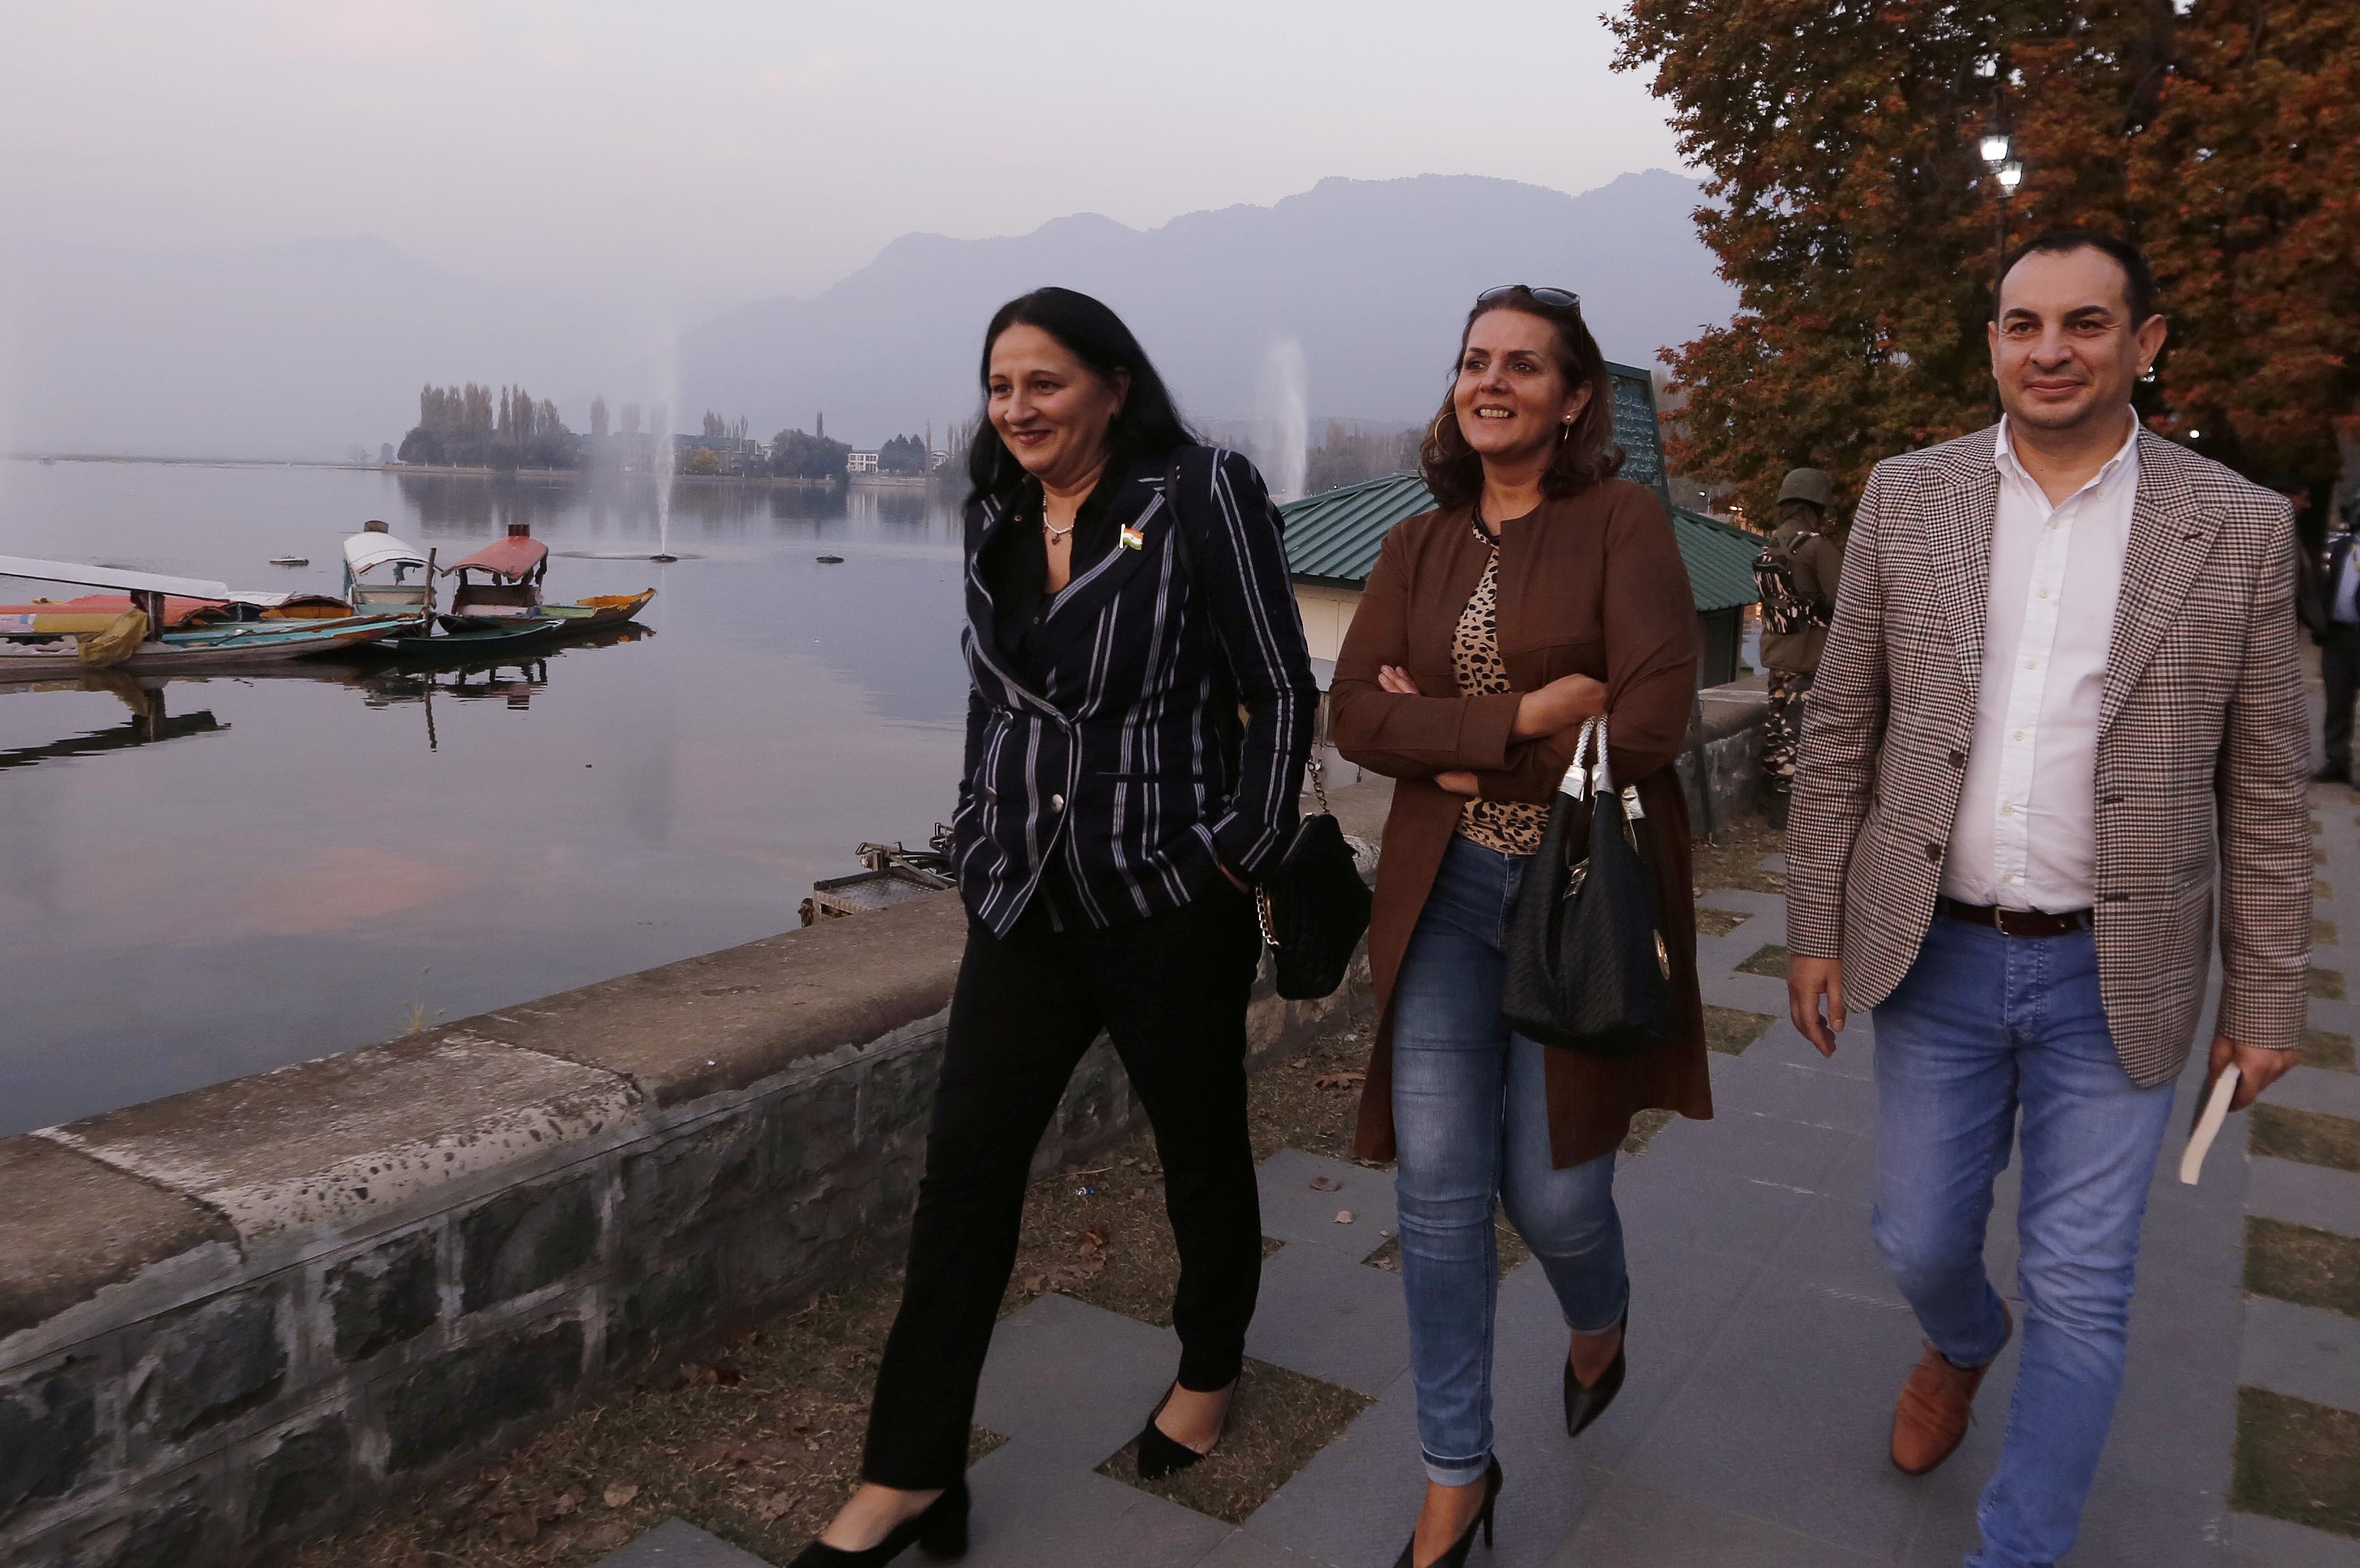 European European Union lawmakers walk on the banks of Dal Lake in Srinagar on 29 October (Reuters)